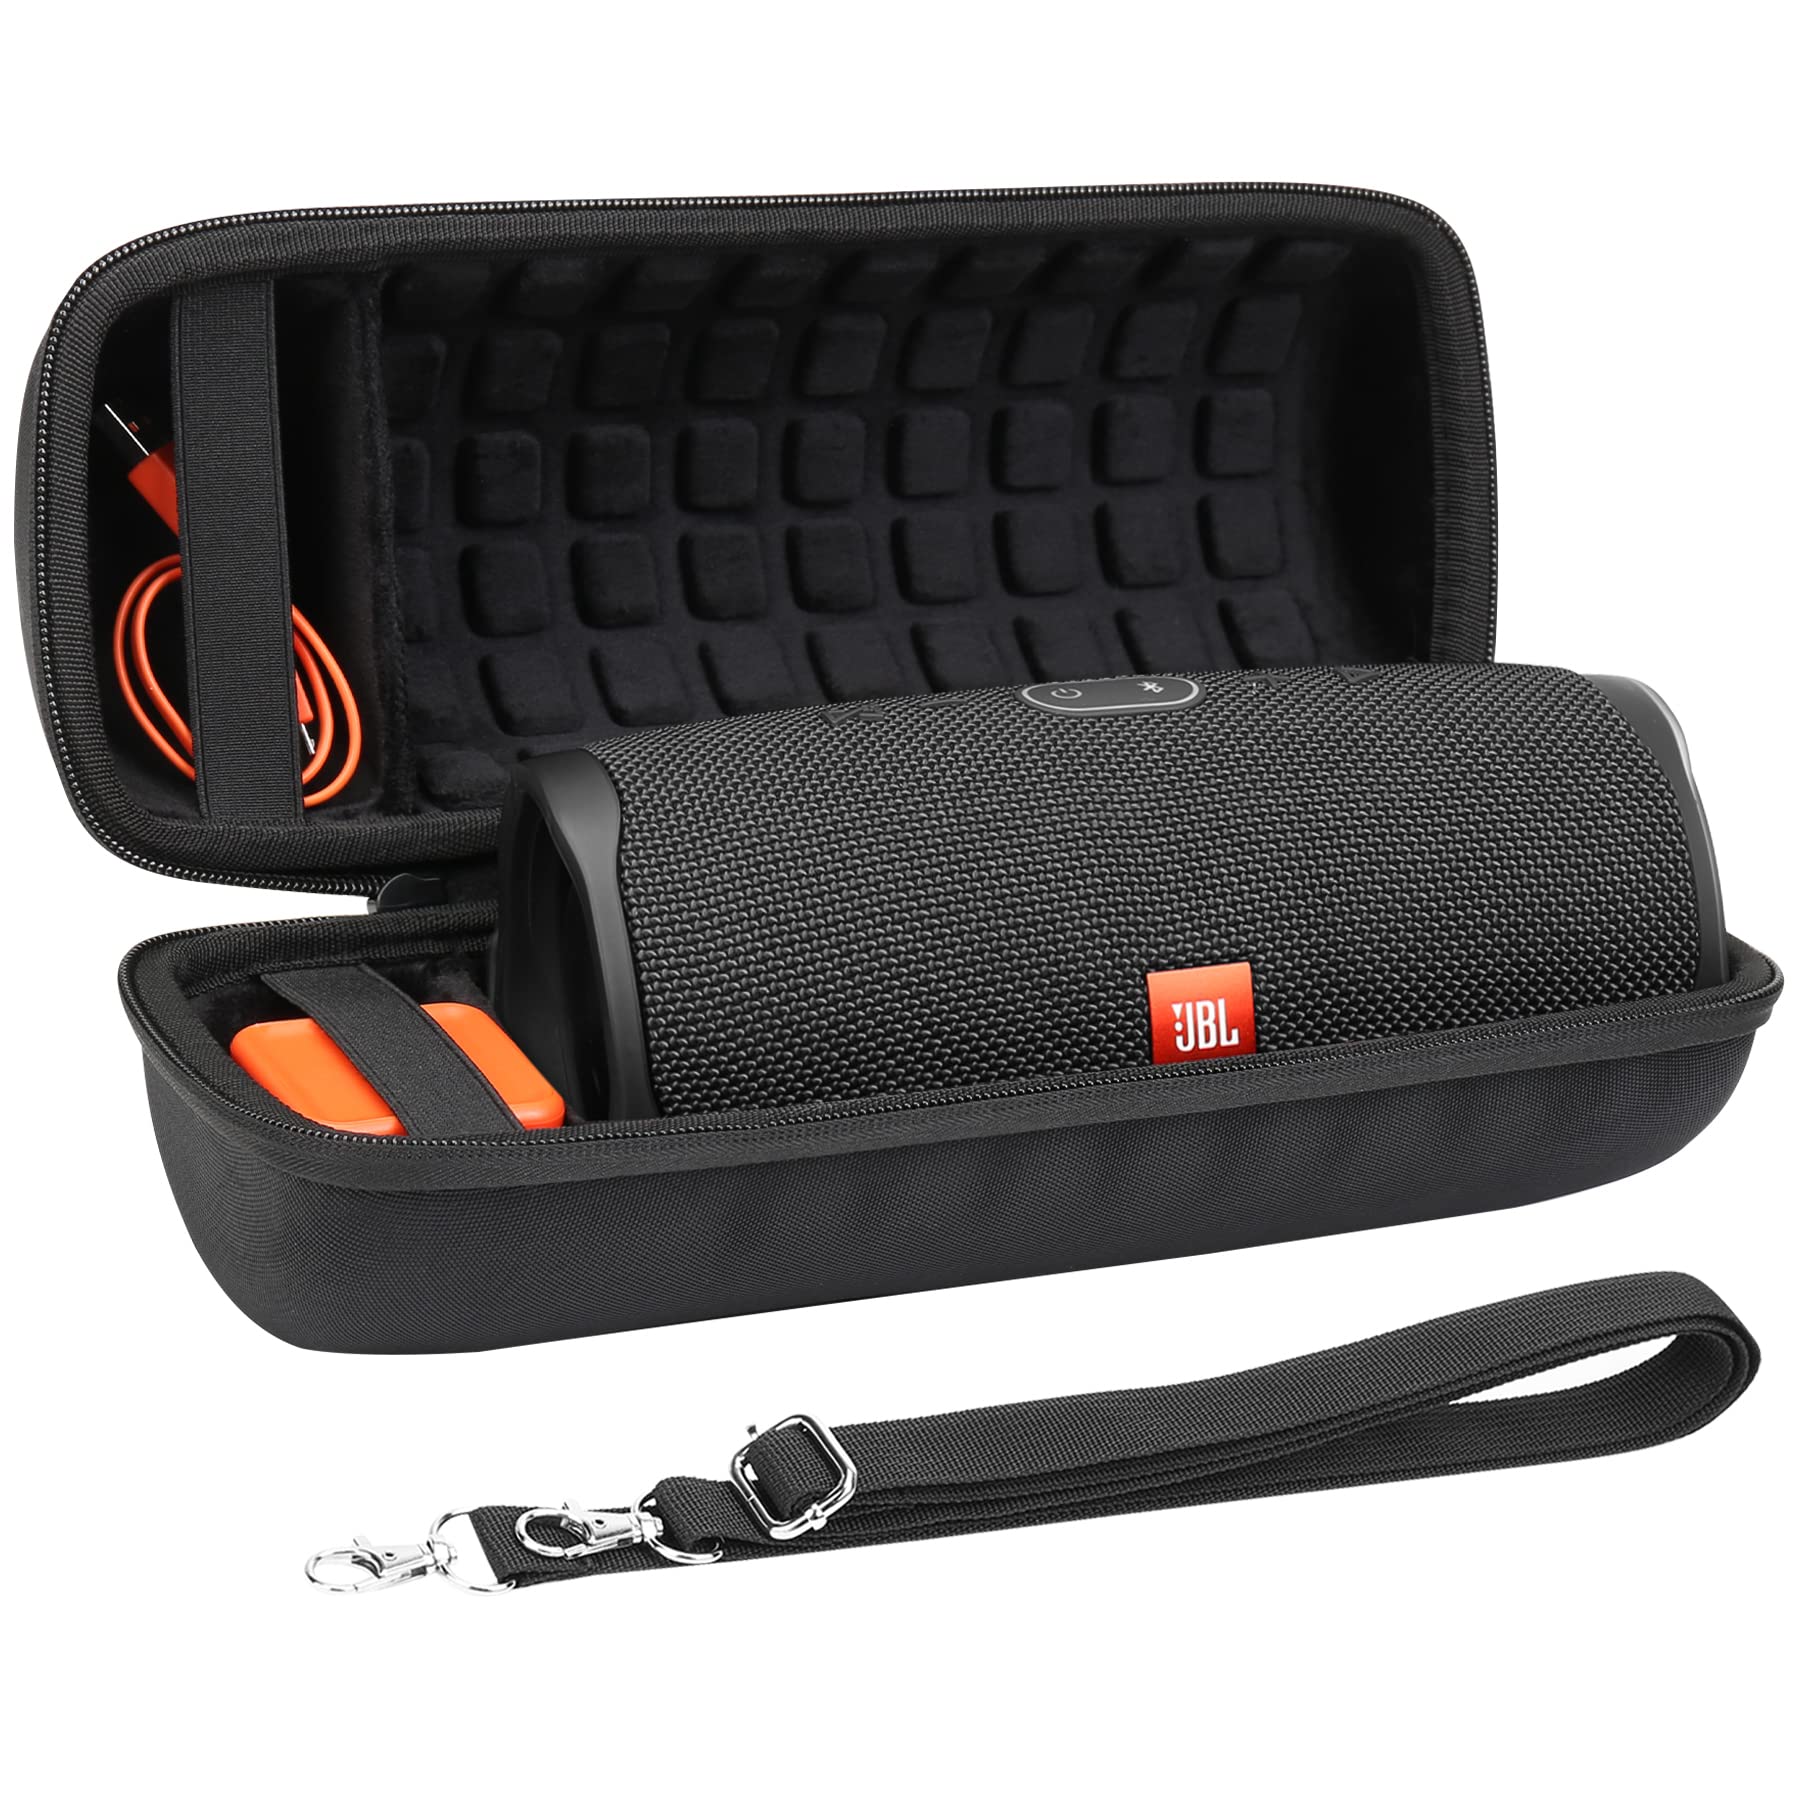 co2CREA Hard Travel Case Replacement for JBL Charge 4 / Charge 5 Waterproof Bluetooth Speaker (Black Case)